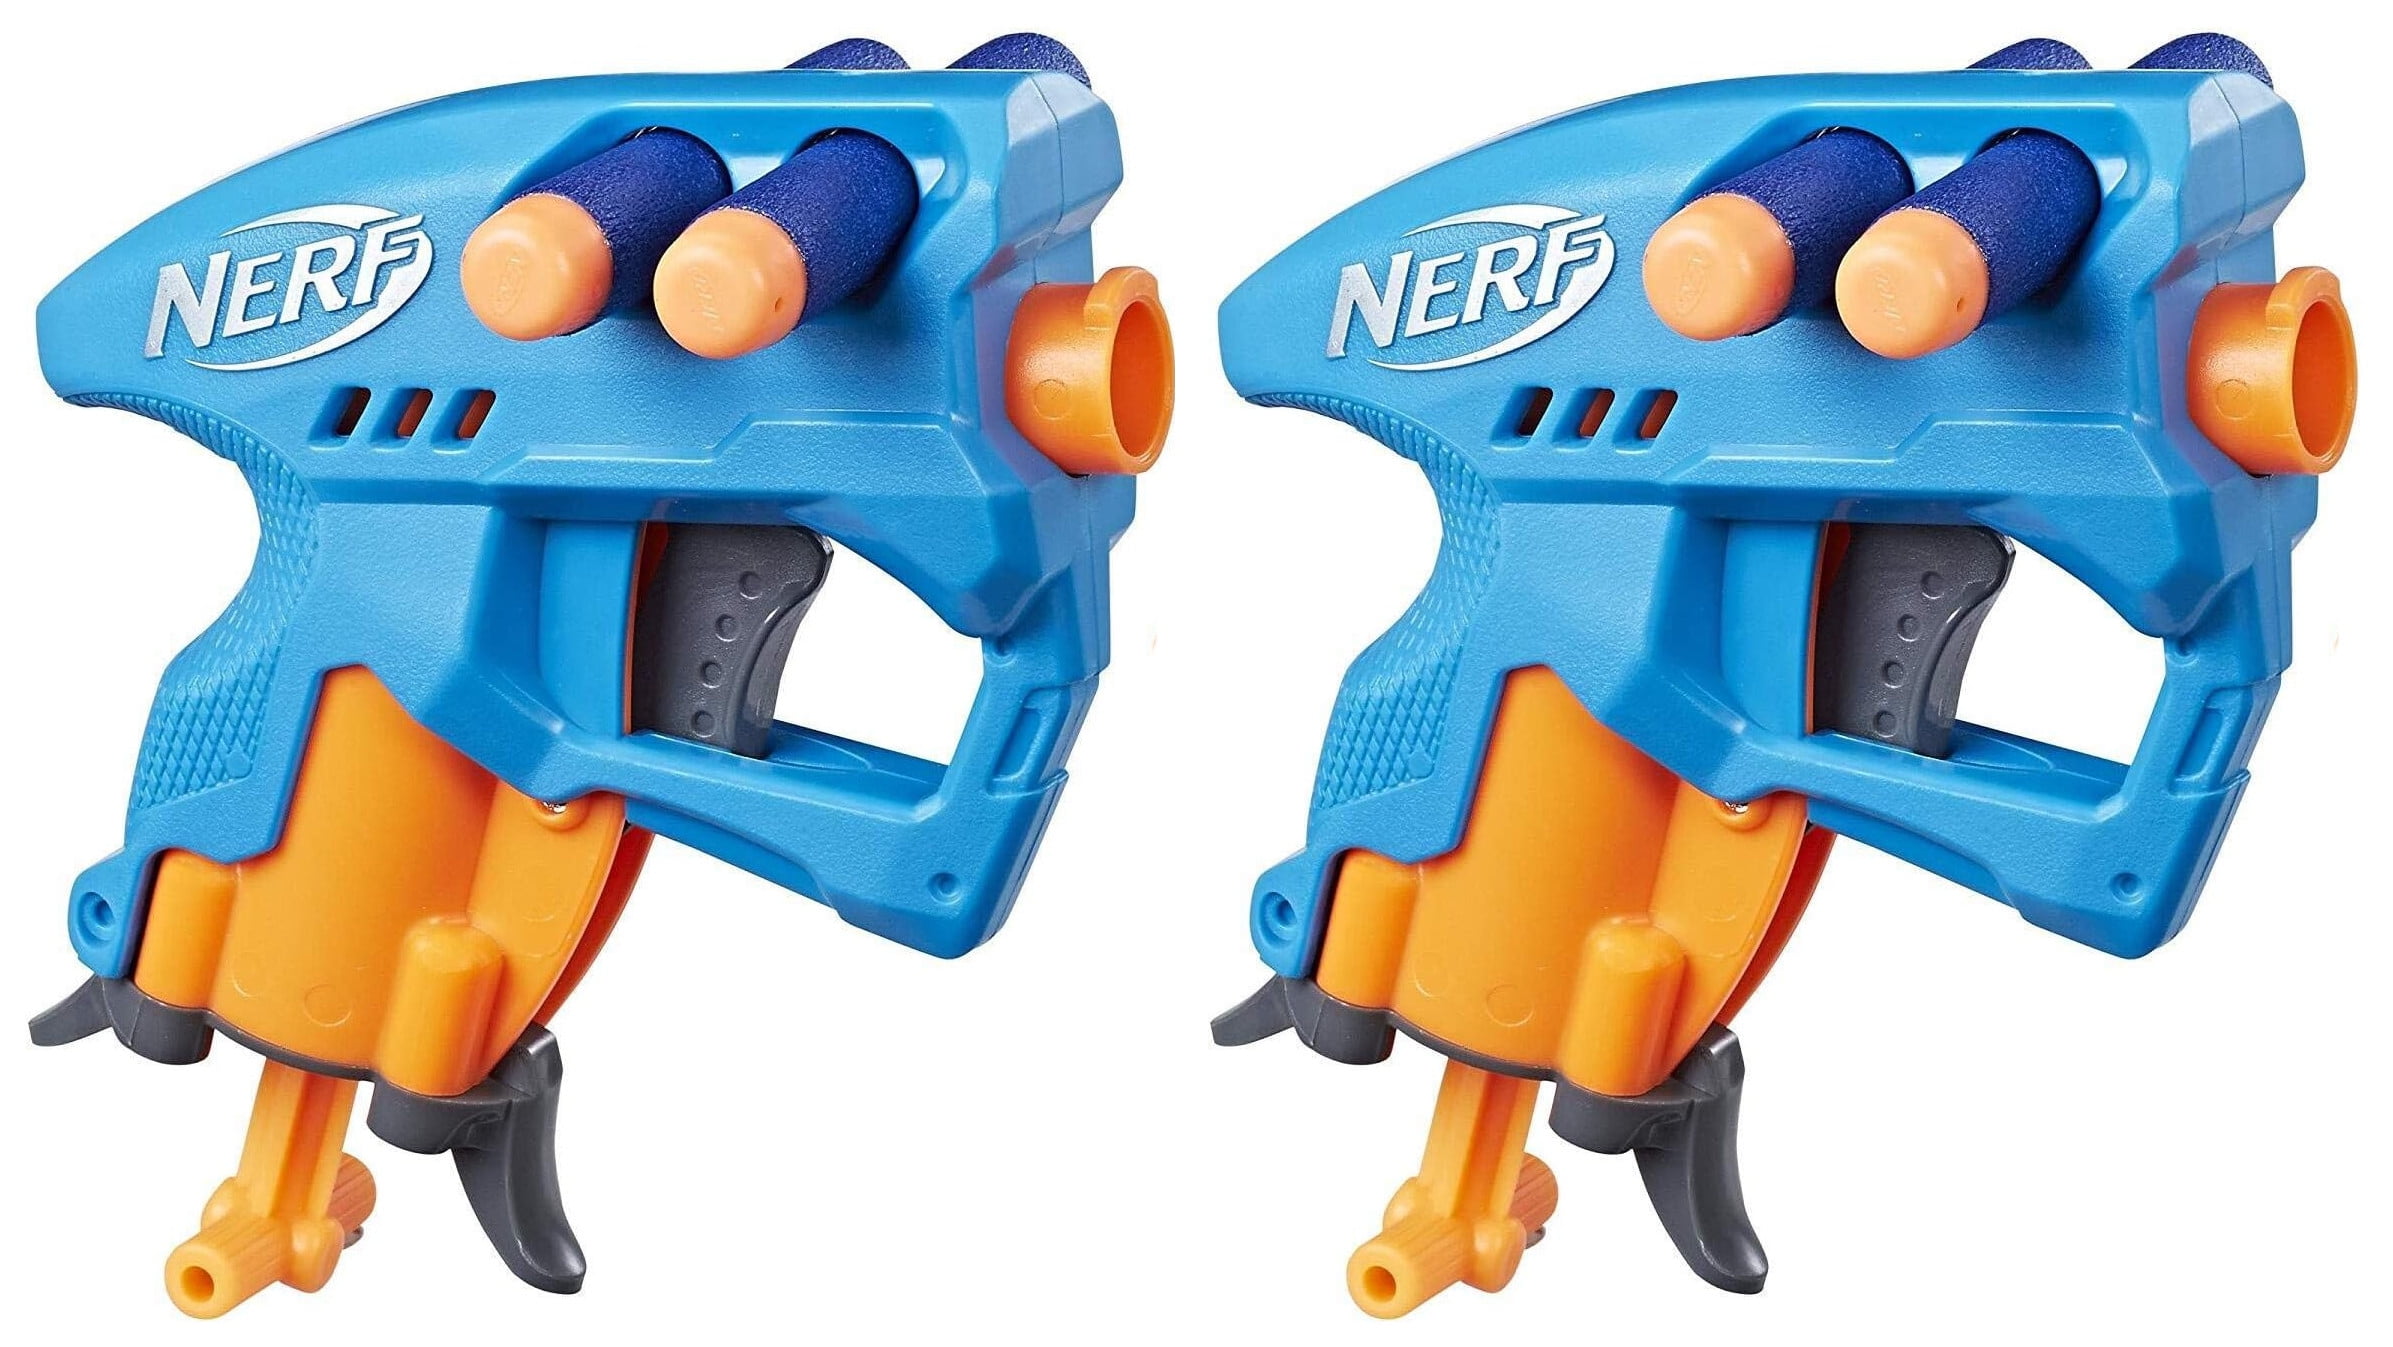 Nerf Alpha Strike Boa RC-6 Blaster with 6-Dart Rotating Drum -- Fire 6  Darts in a Row -- Includes 6 Nerf Elite Darts - Nerf